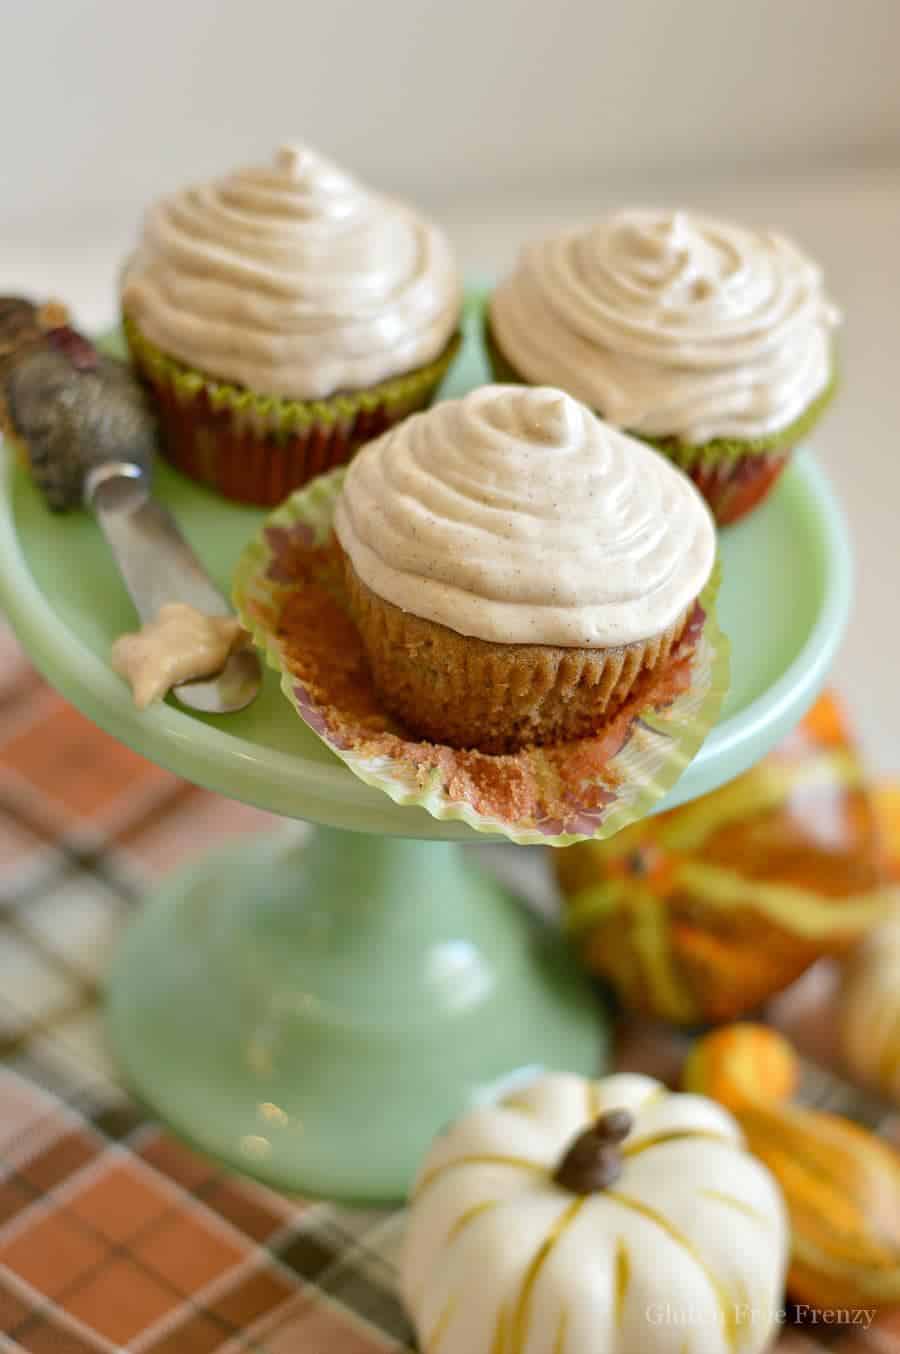 These gluten-free apple cider cupcakes are moist and full of fall flavors. Warm cinnamon and apple come together in a great dessert that's perfect for Thanksgiving. www.glutenfreefrenzy.com